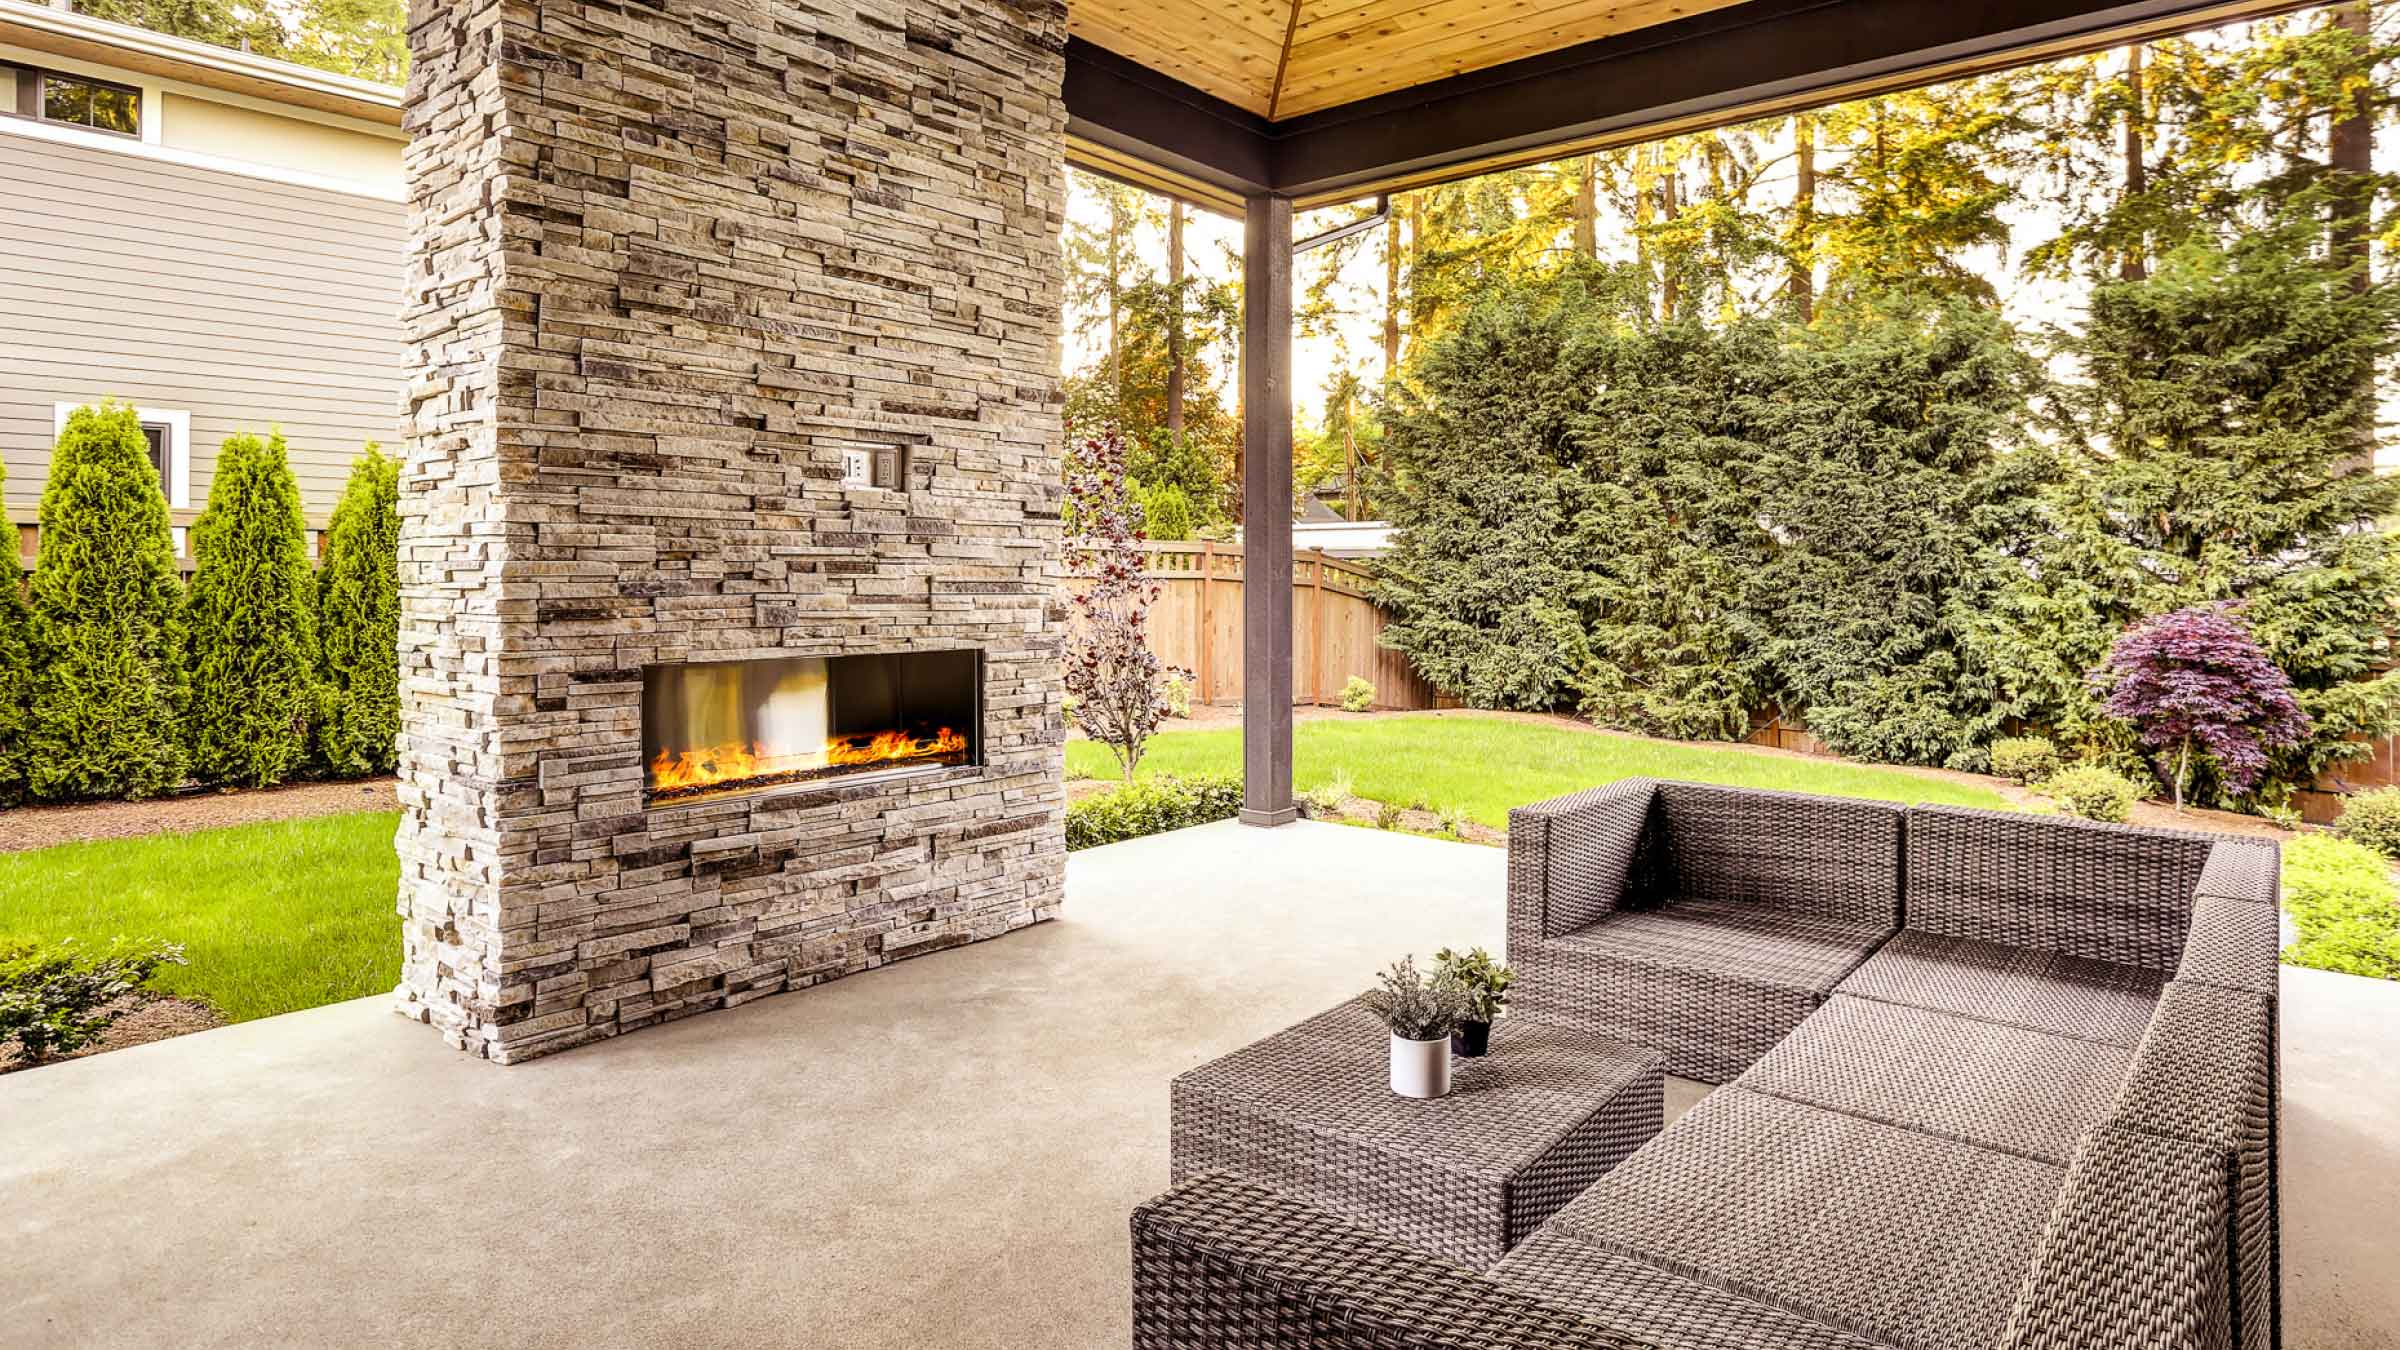 Modern outdoor entertainment area, with glass front fireplace mounted on stonework column.